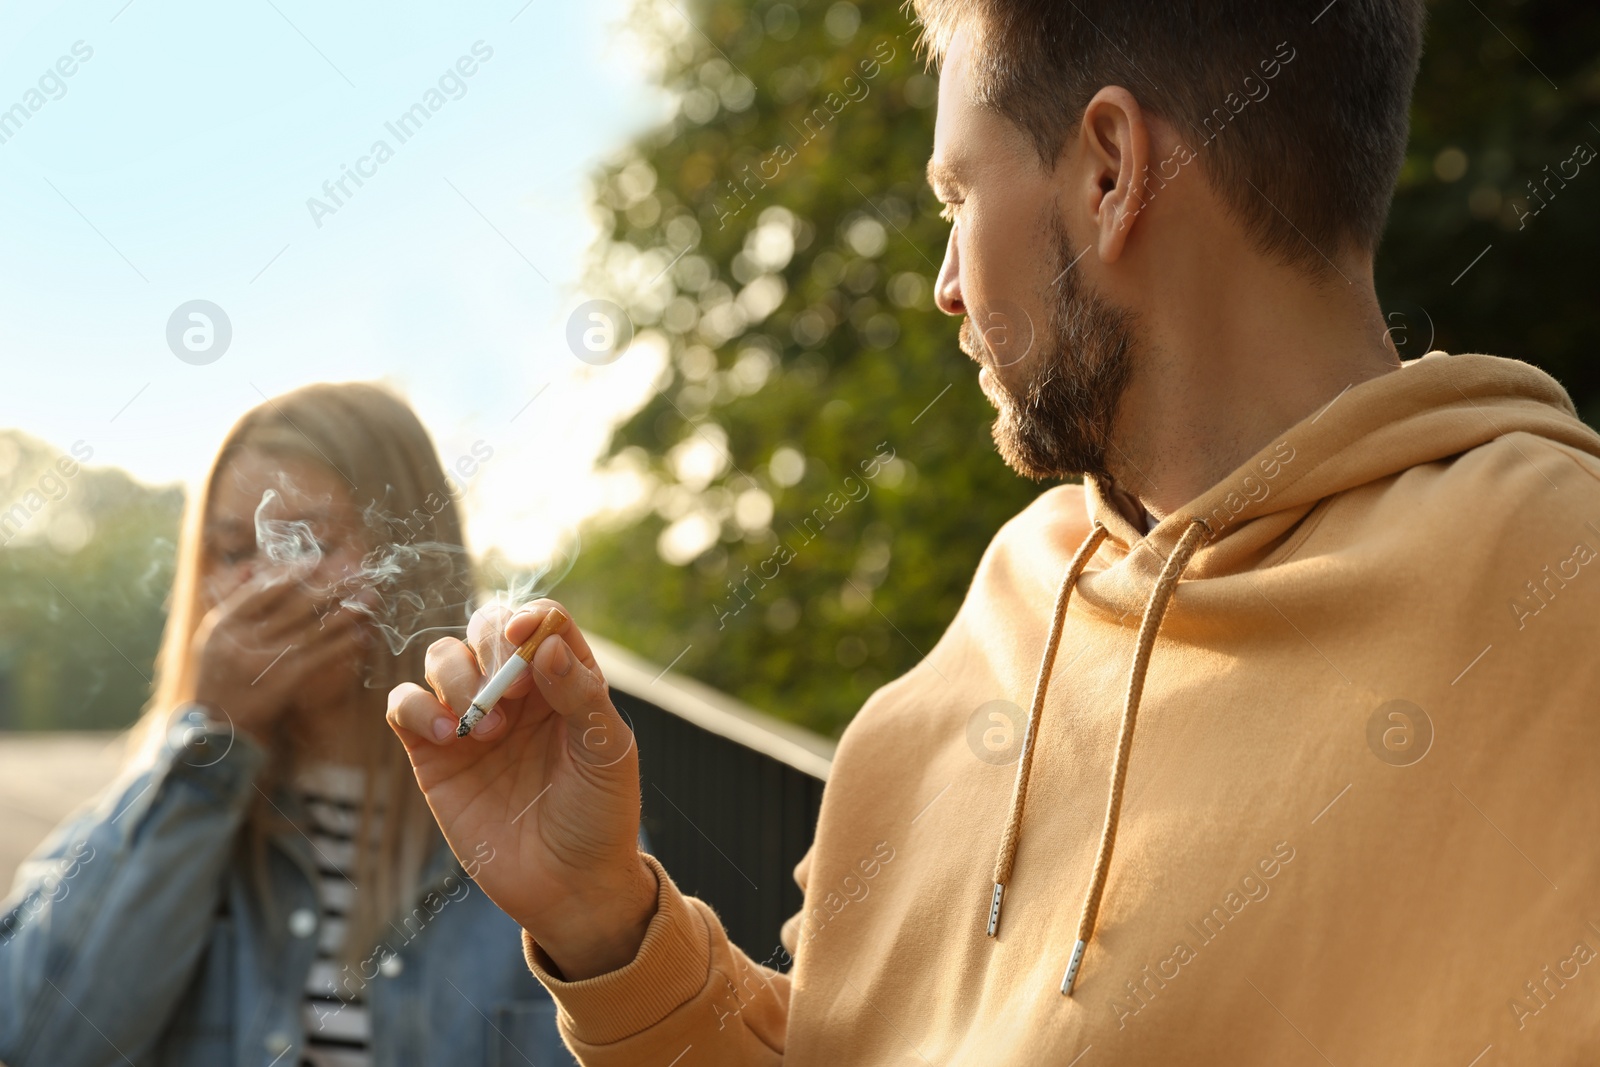 Photo of Handsome man smoking cigarette at public place outdoors